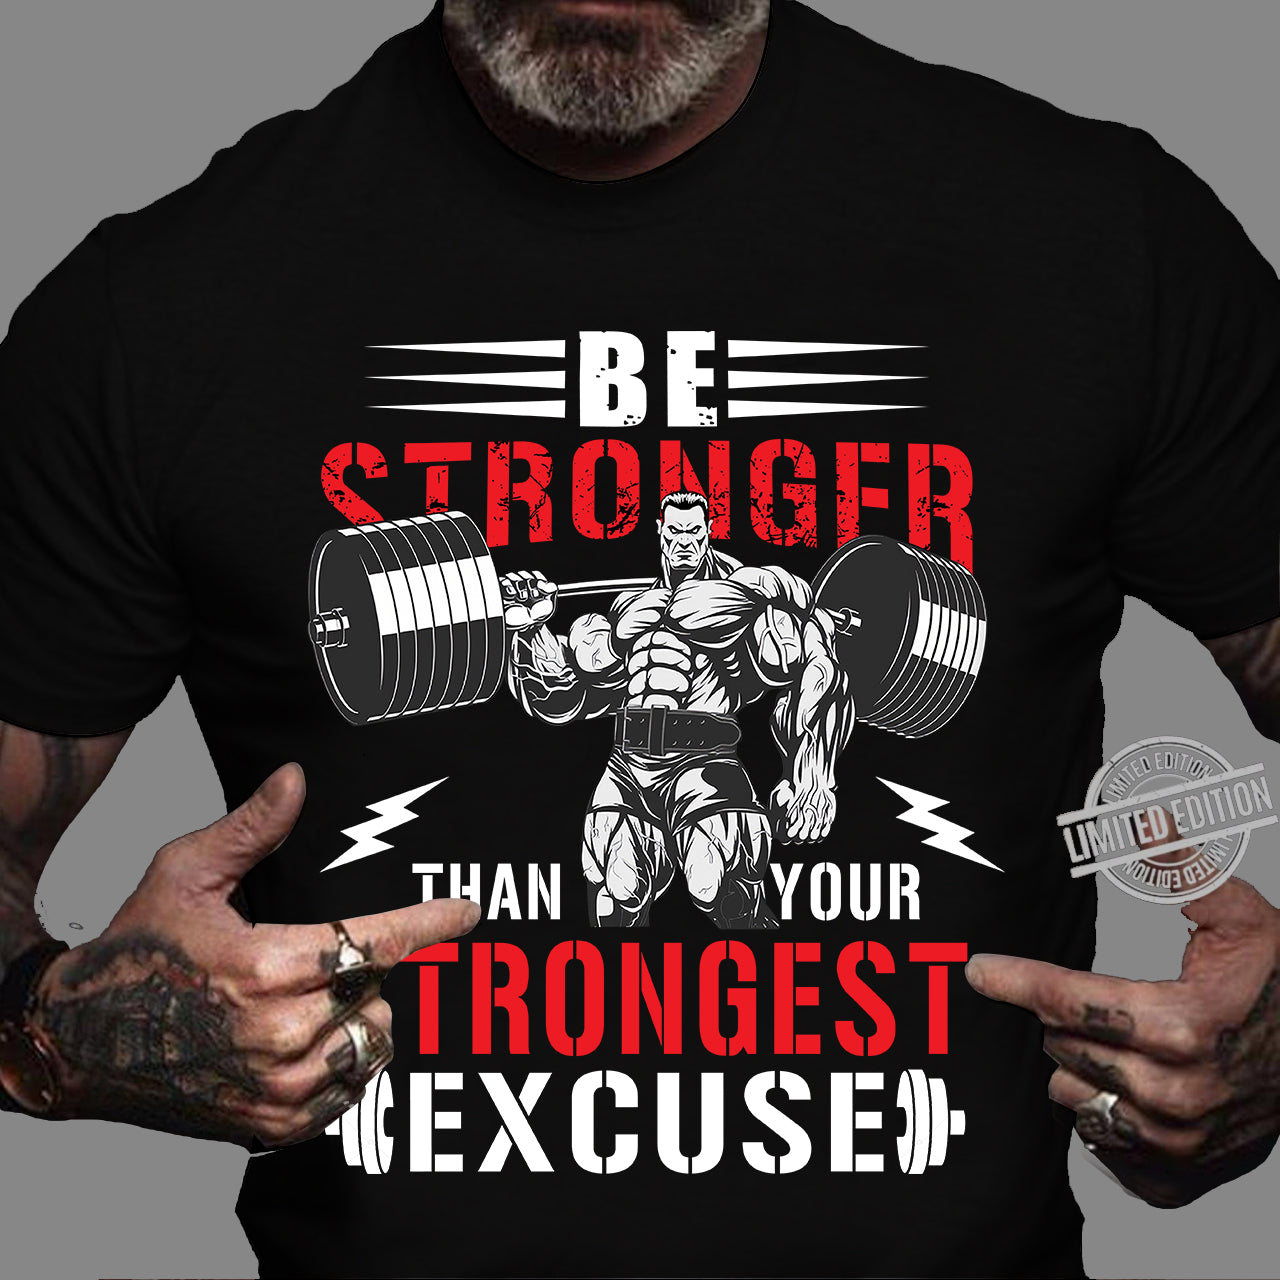 Gym Muscle Man Motivational Quotes Saying T-shirt 10528